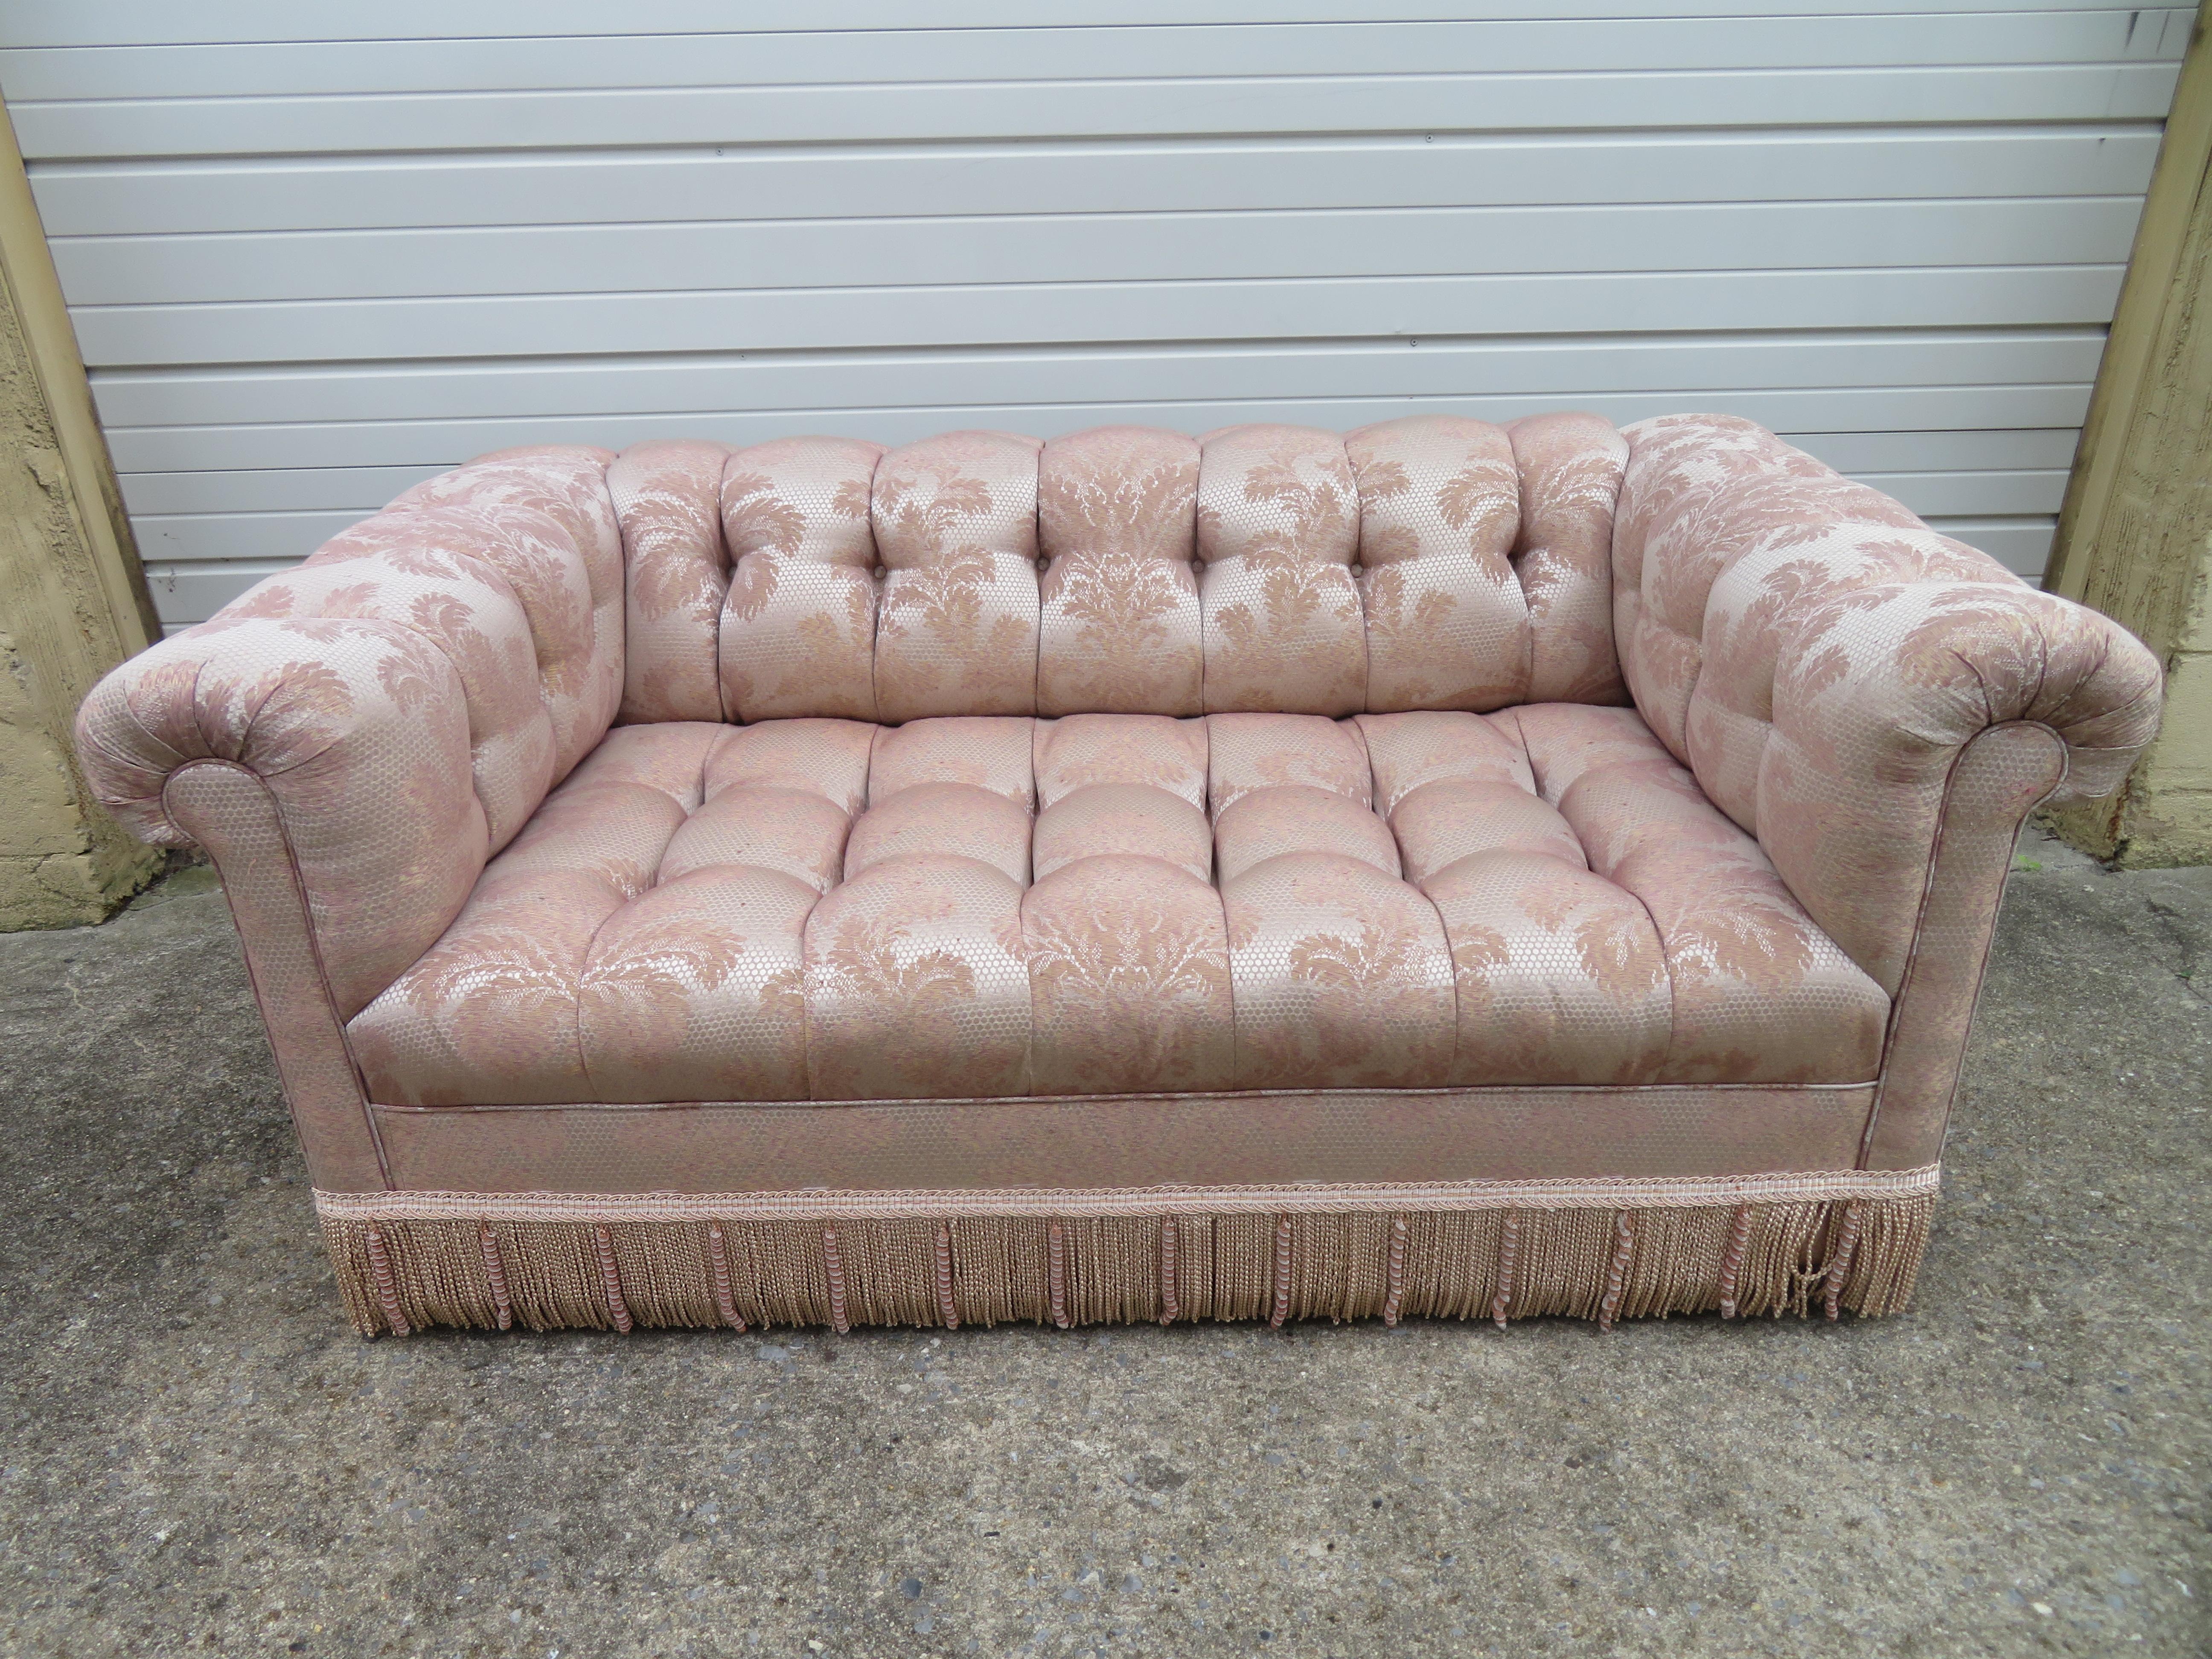 Magnificent Directional Biscuit Tufted Party Sofa Midcentury For Sale 6